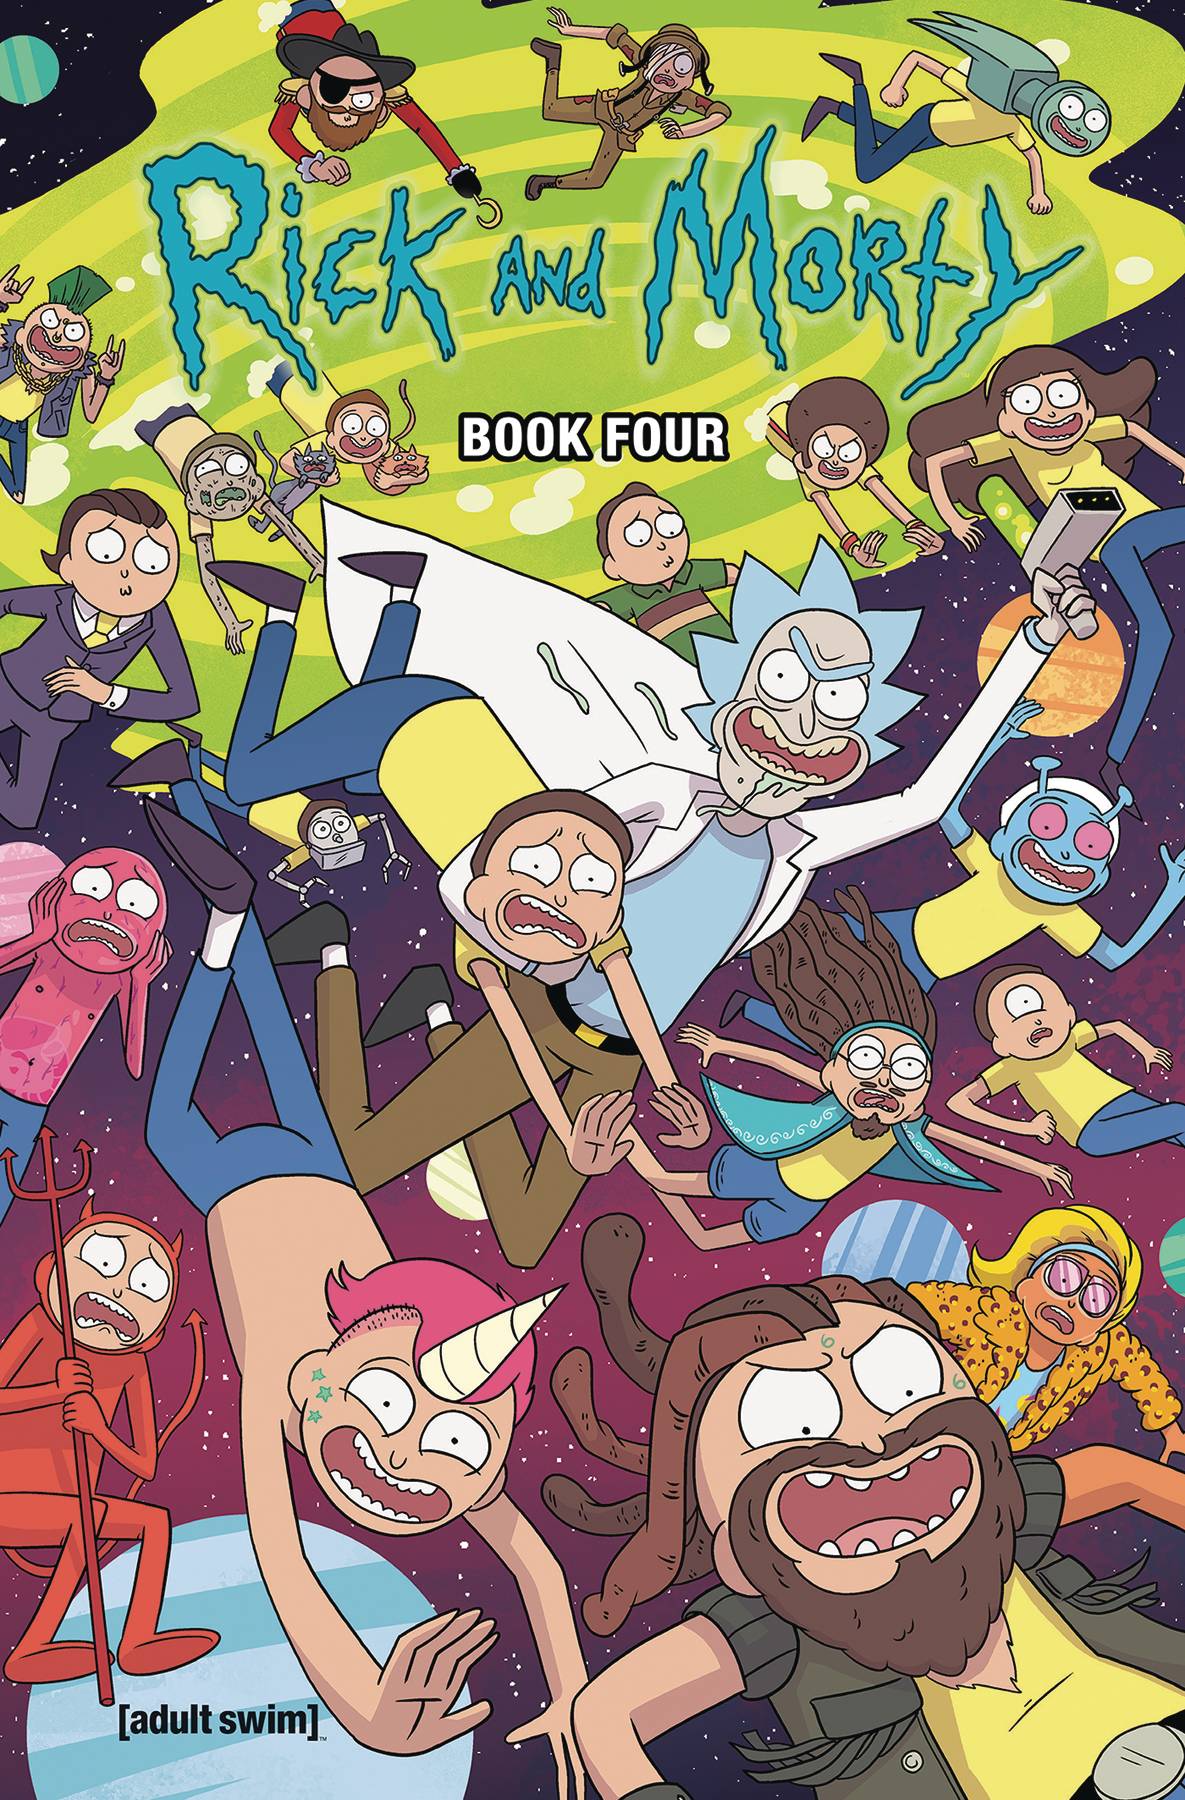 Rick and Morty Hardcover Book 4 Deluxe Edition (Mature)